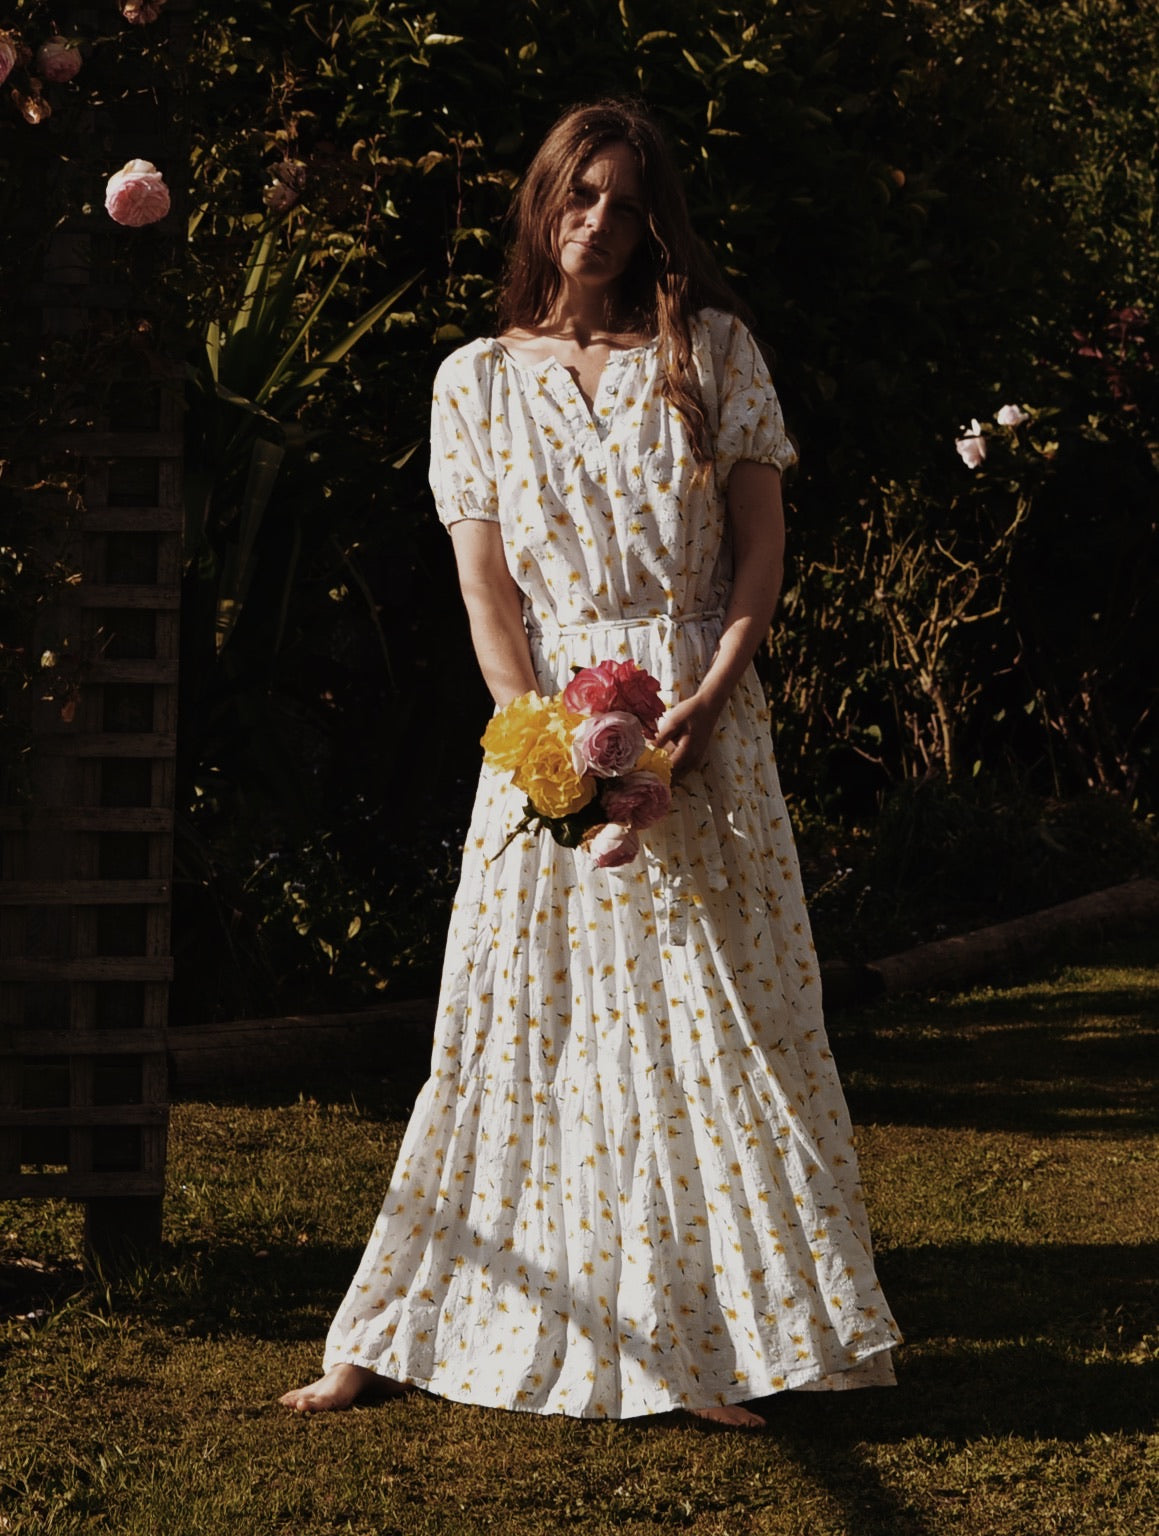 100% RECYCLED COTTON - DELPHINIUM MAXI DRESS WHITE DAISY FLORAL